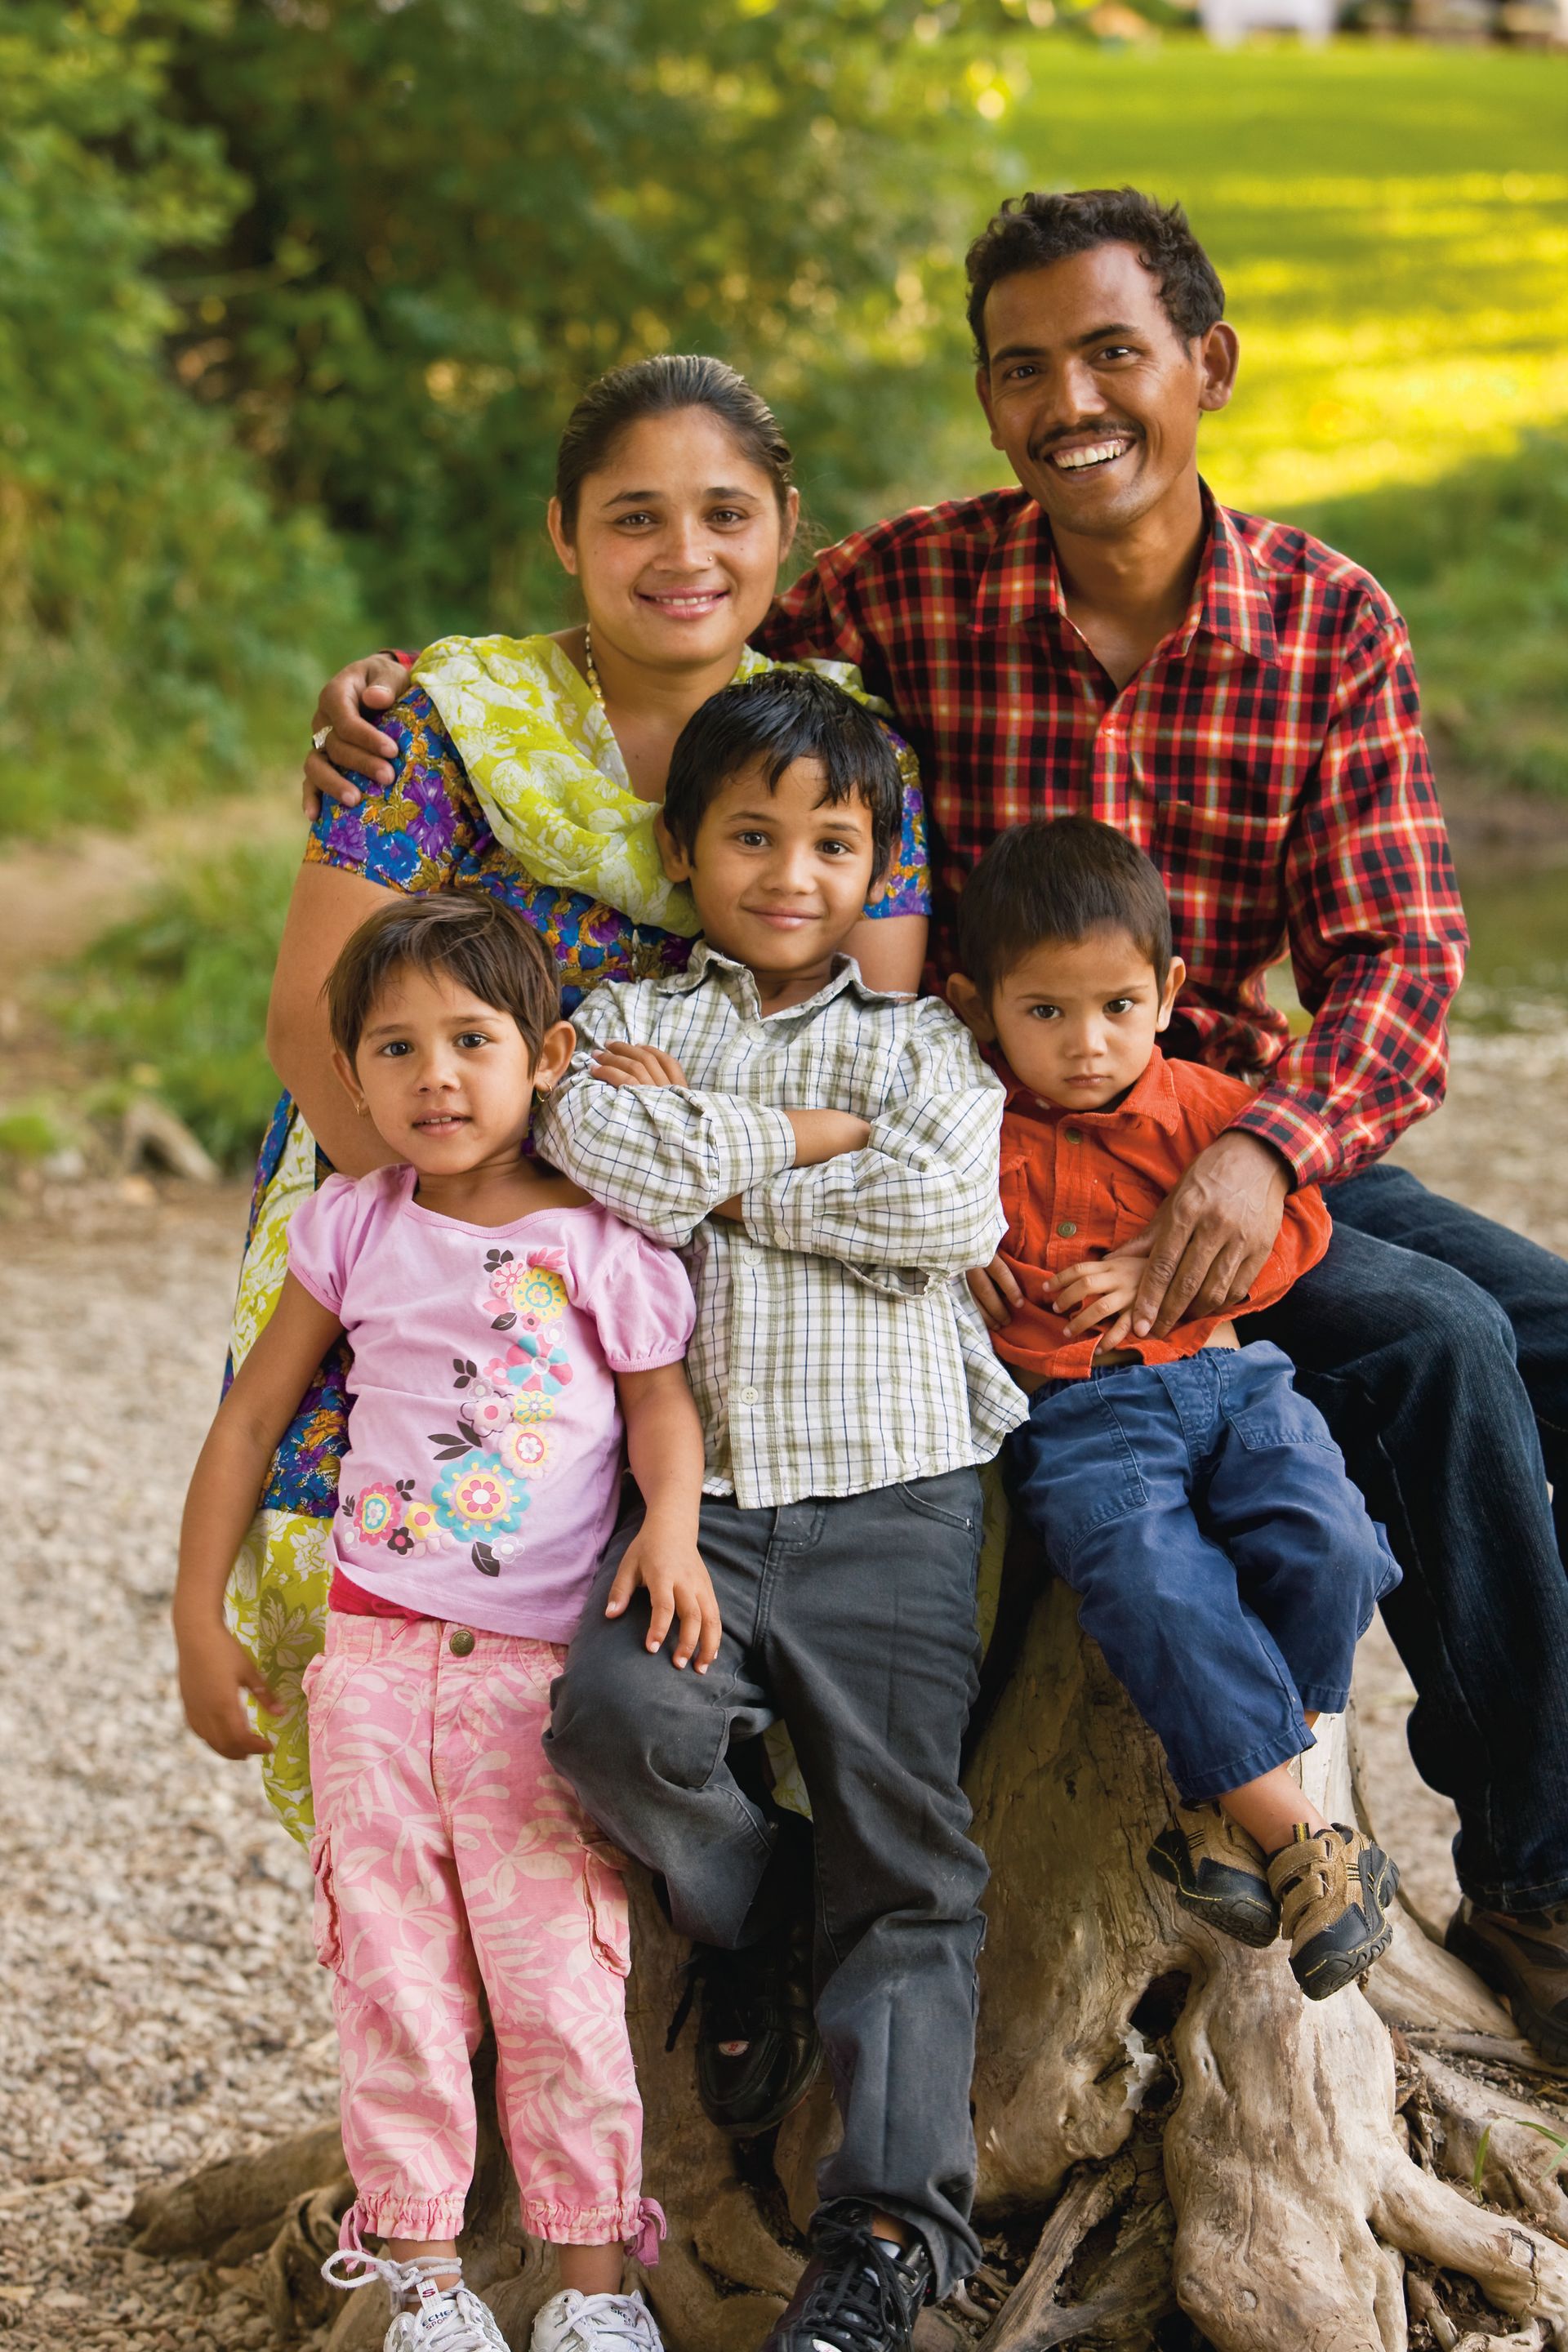 A portrait of a family from Nepal.